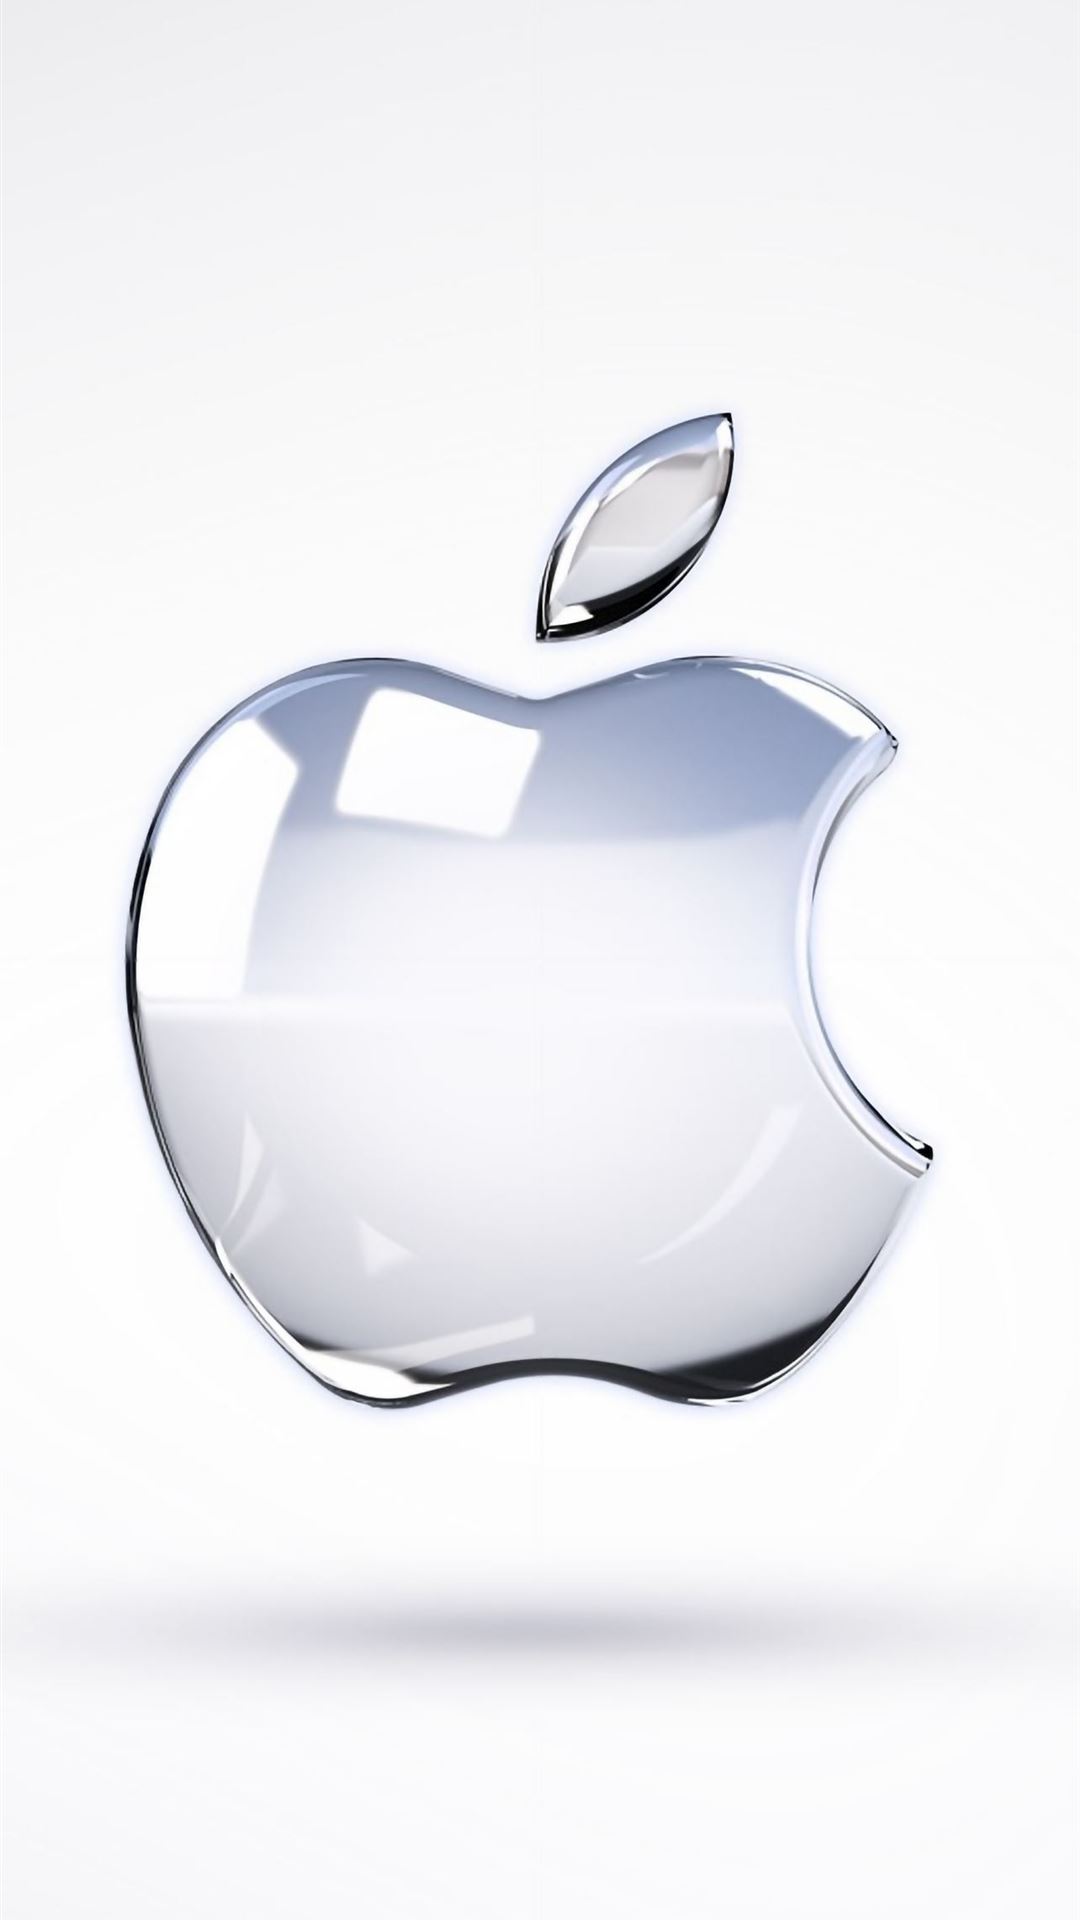 Apple Glass Logo iPhone Wallpapers Free Download